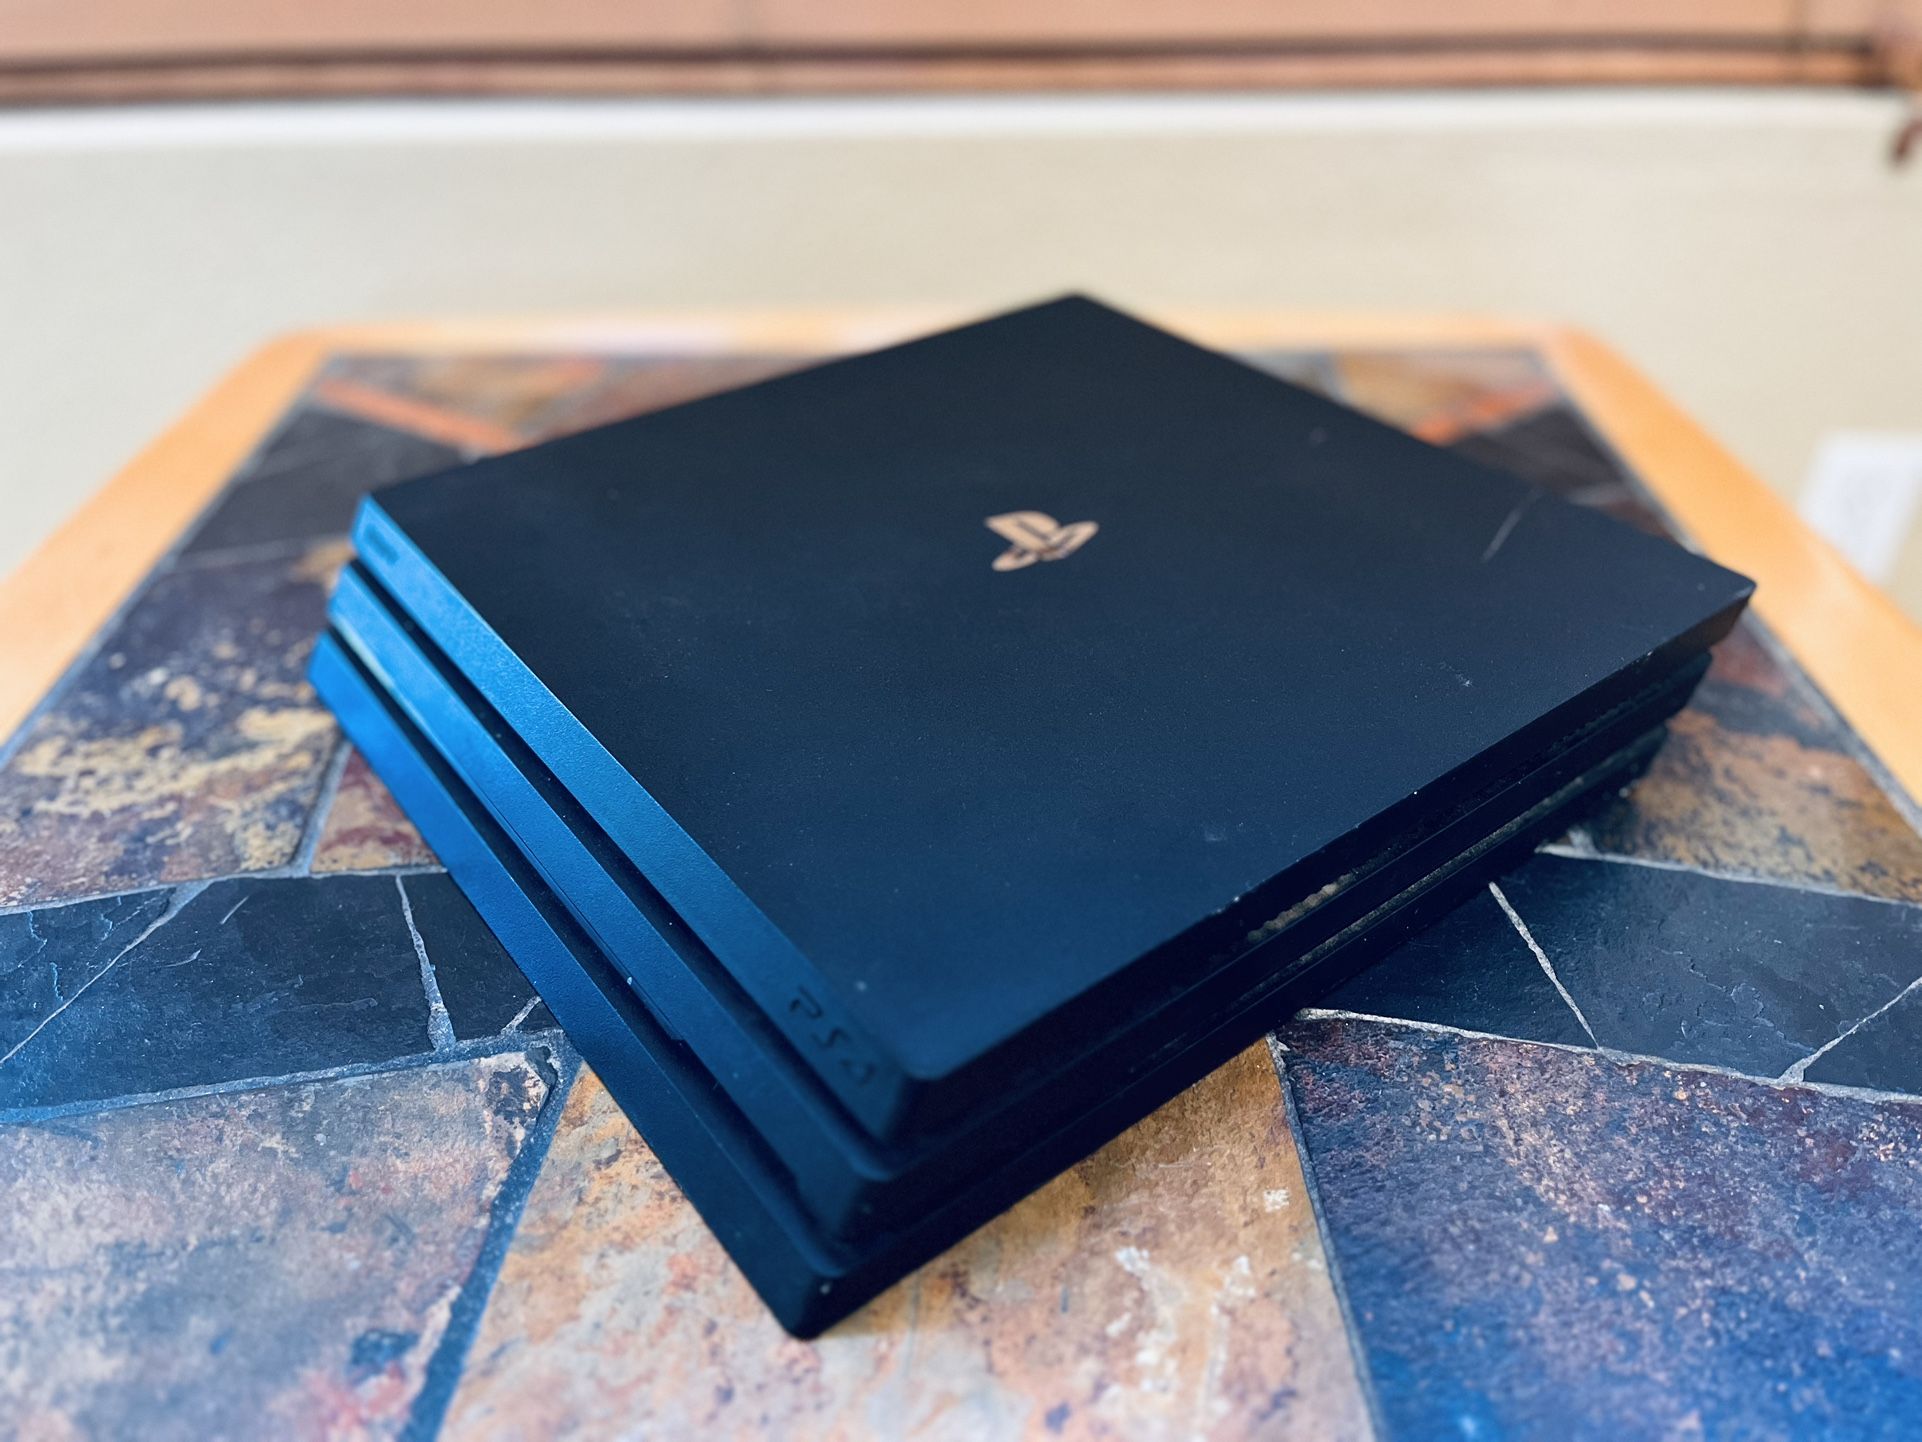 PS4 PRO 1TB Console With Extras 